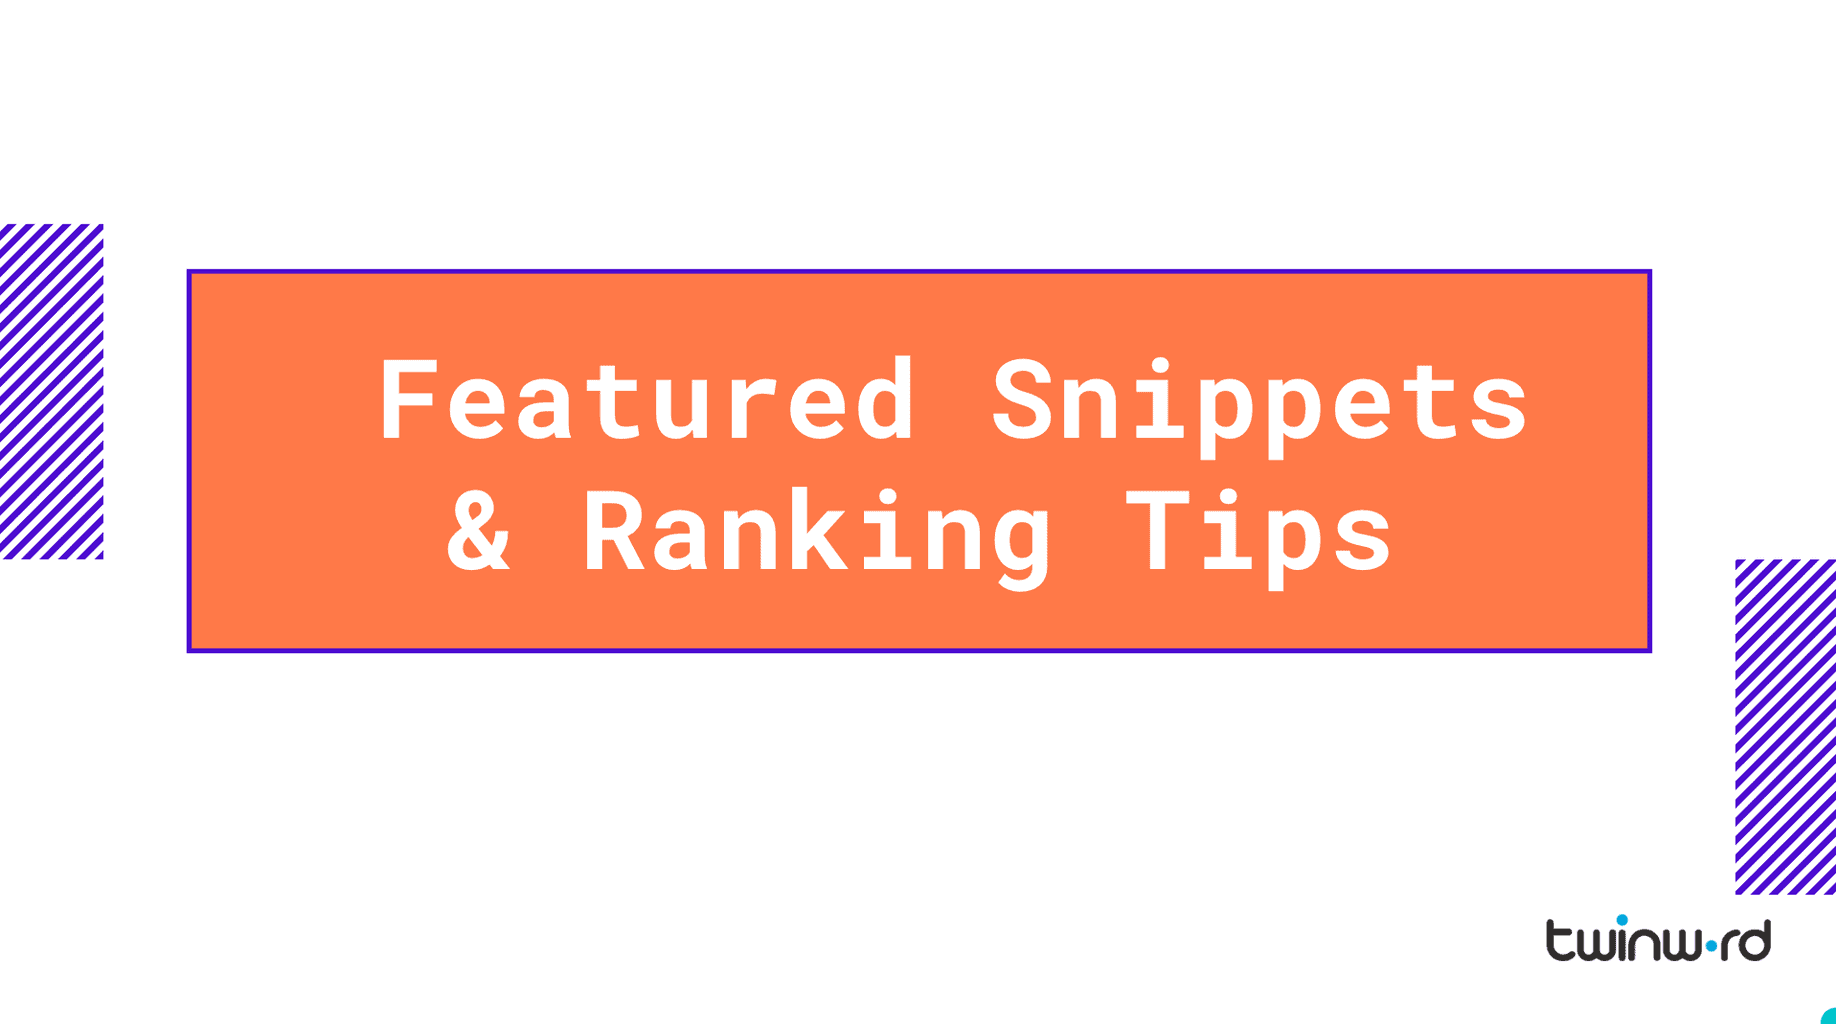 Different types of featured snippets and how to get them